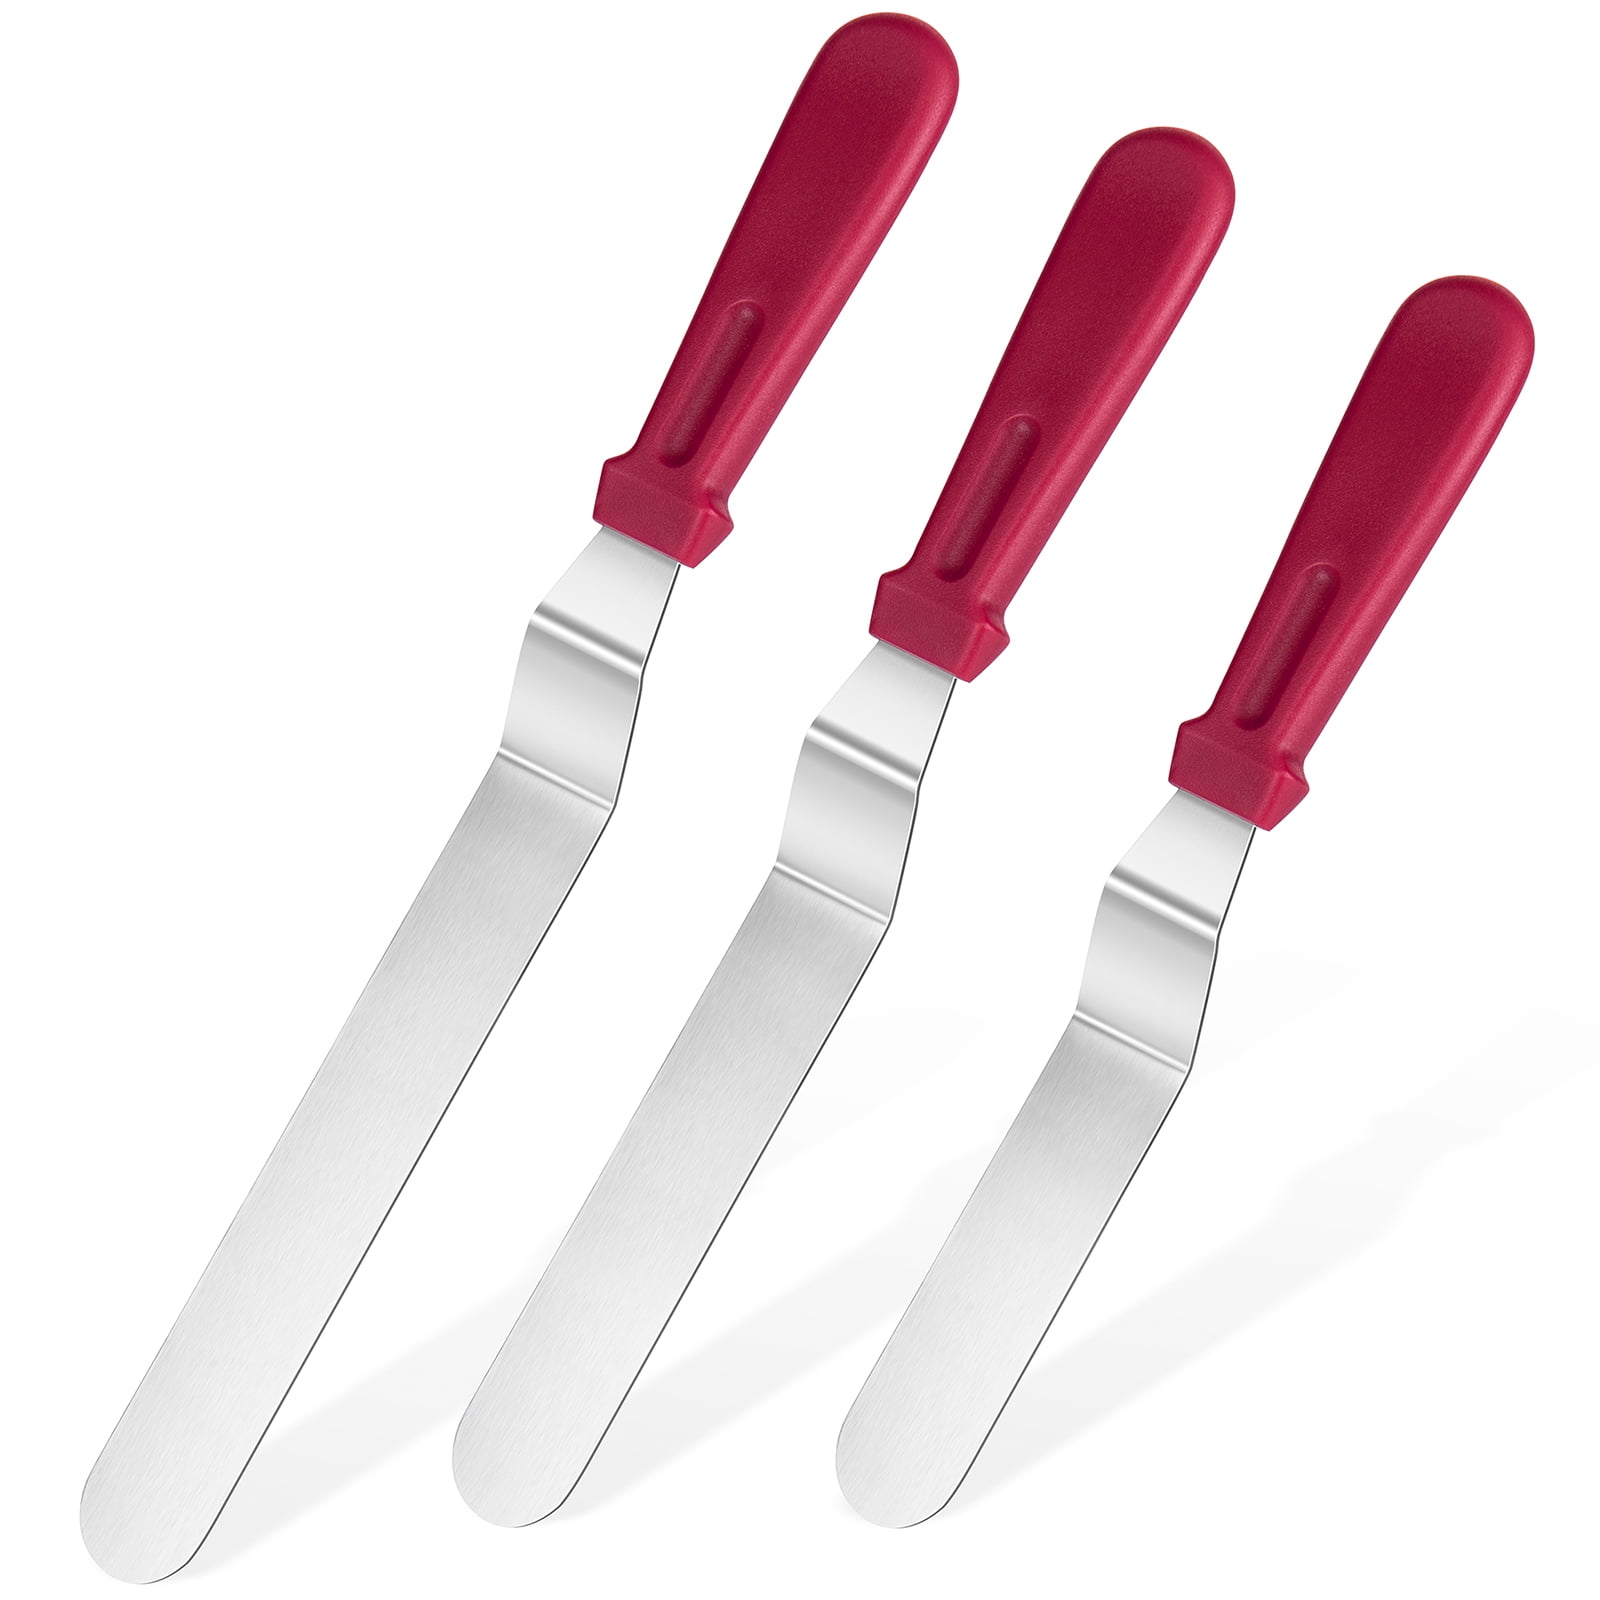 An Offset Spatula Is The One Baking Tool You Should Always Have On Hand